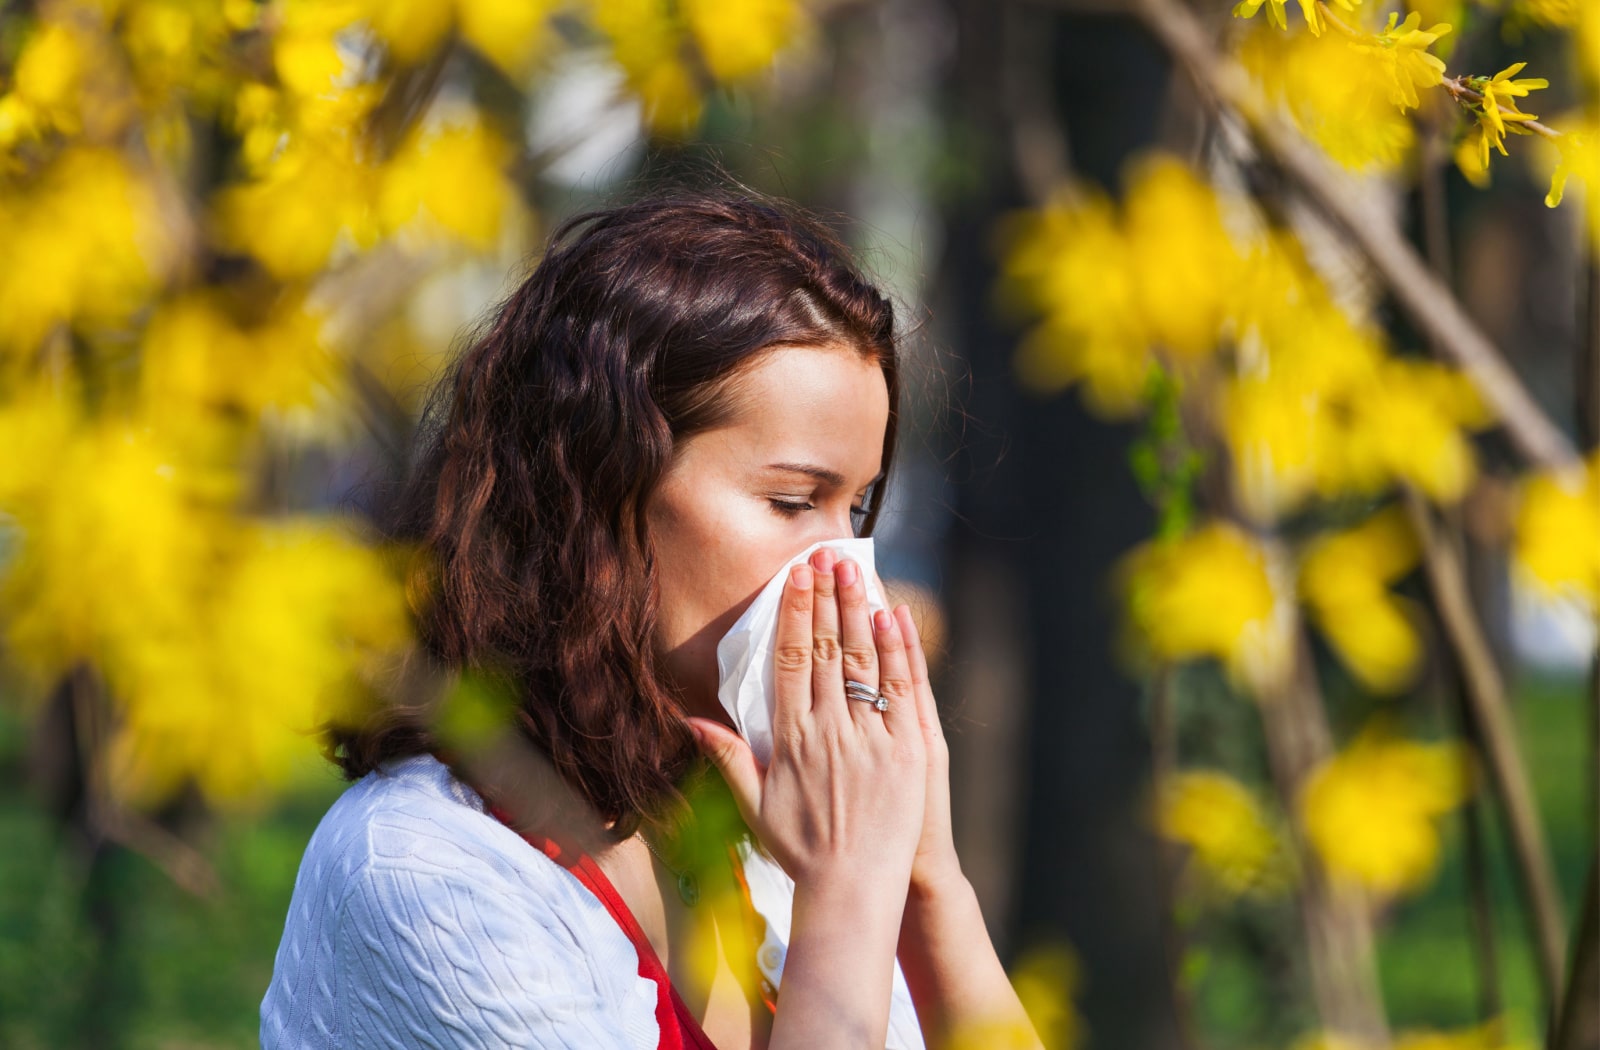 A woman blowing her nose due to seasonal allergies